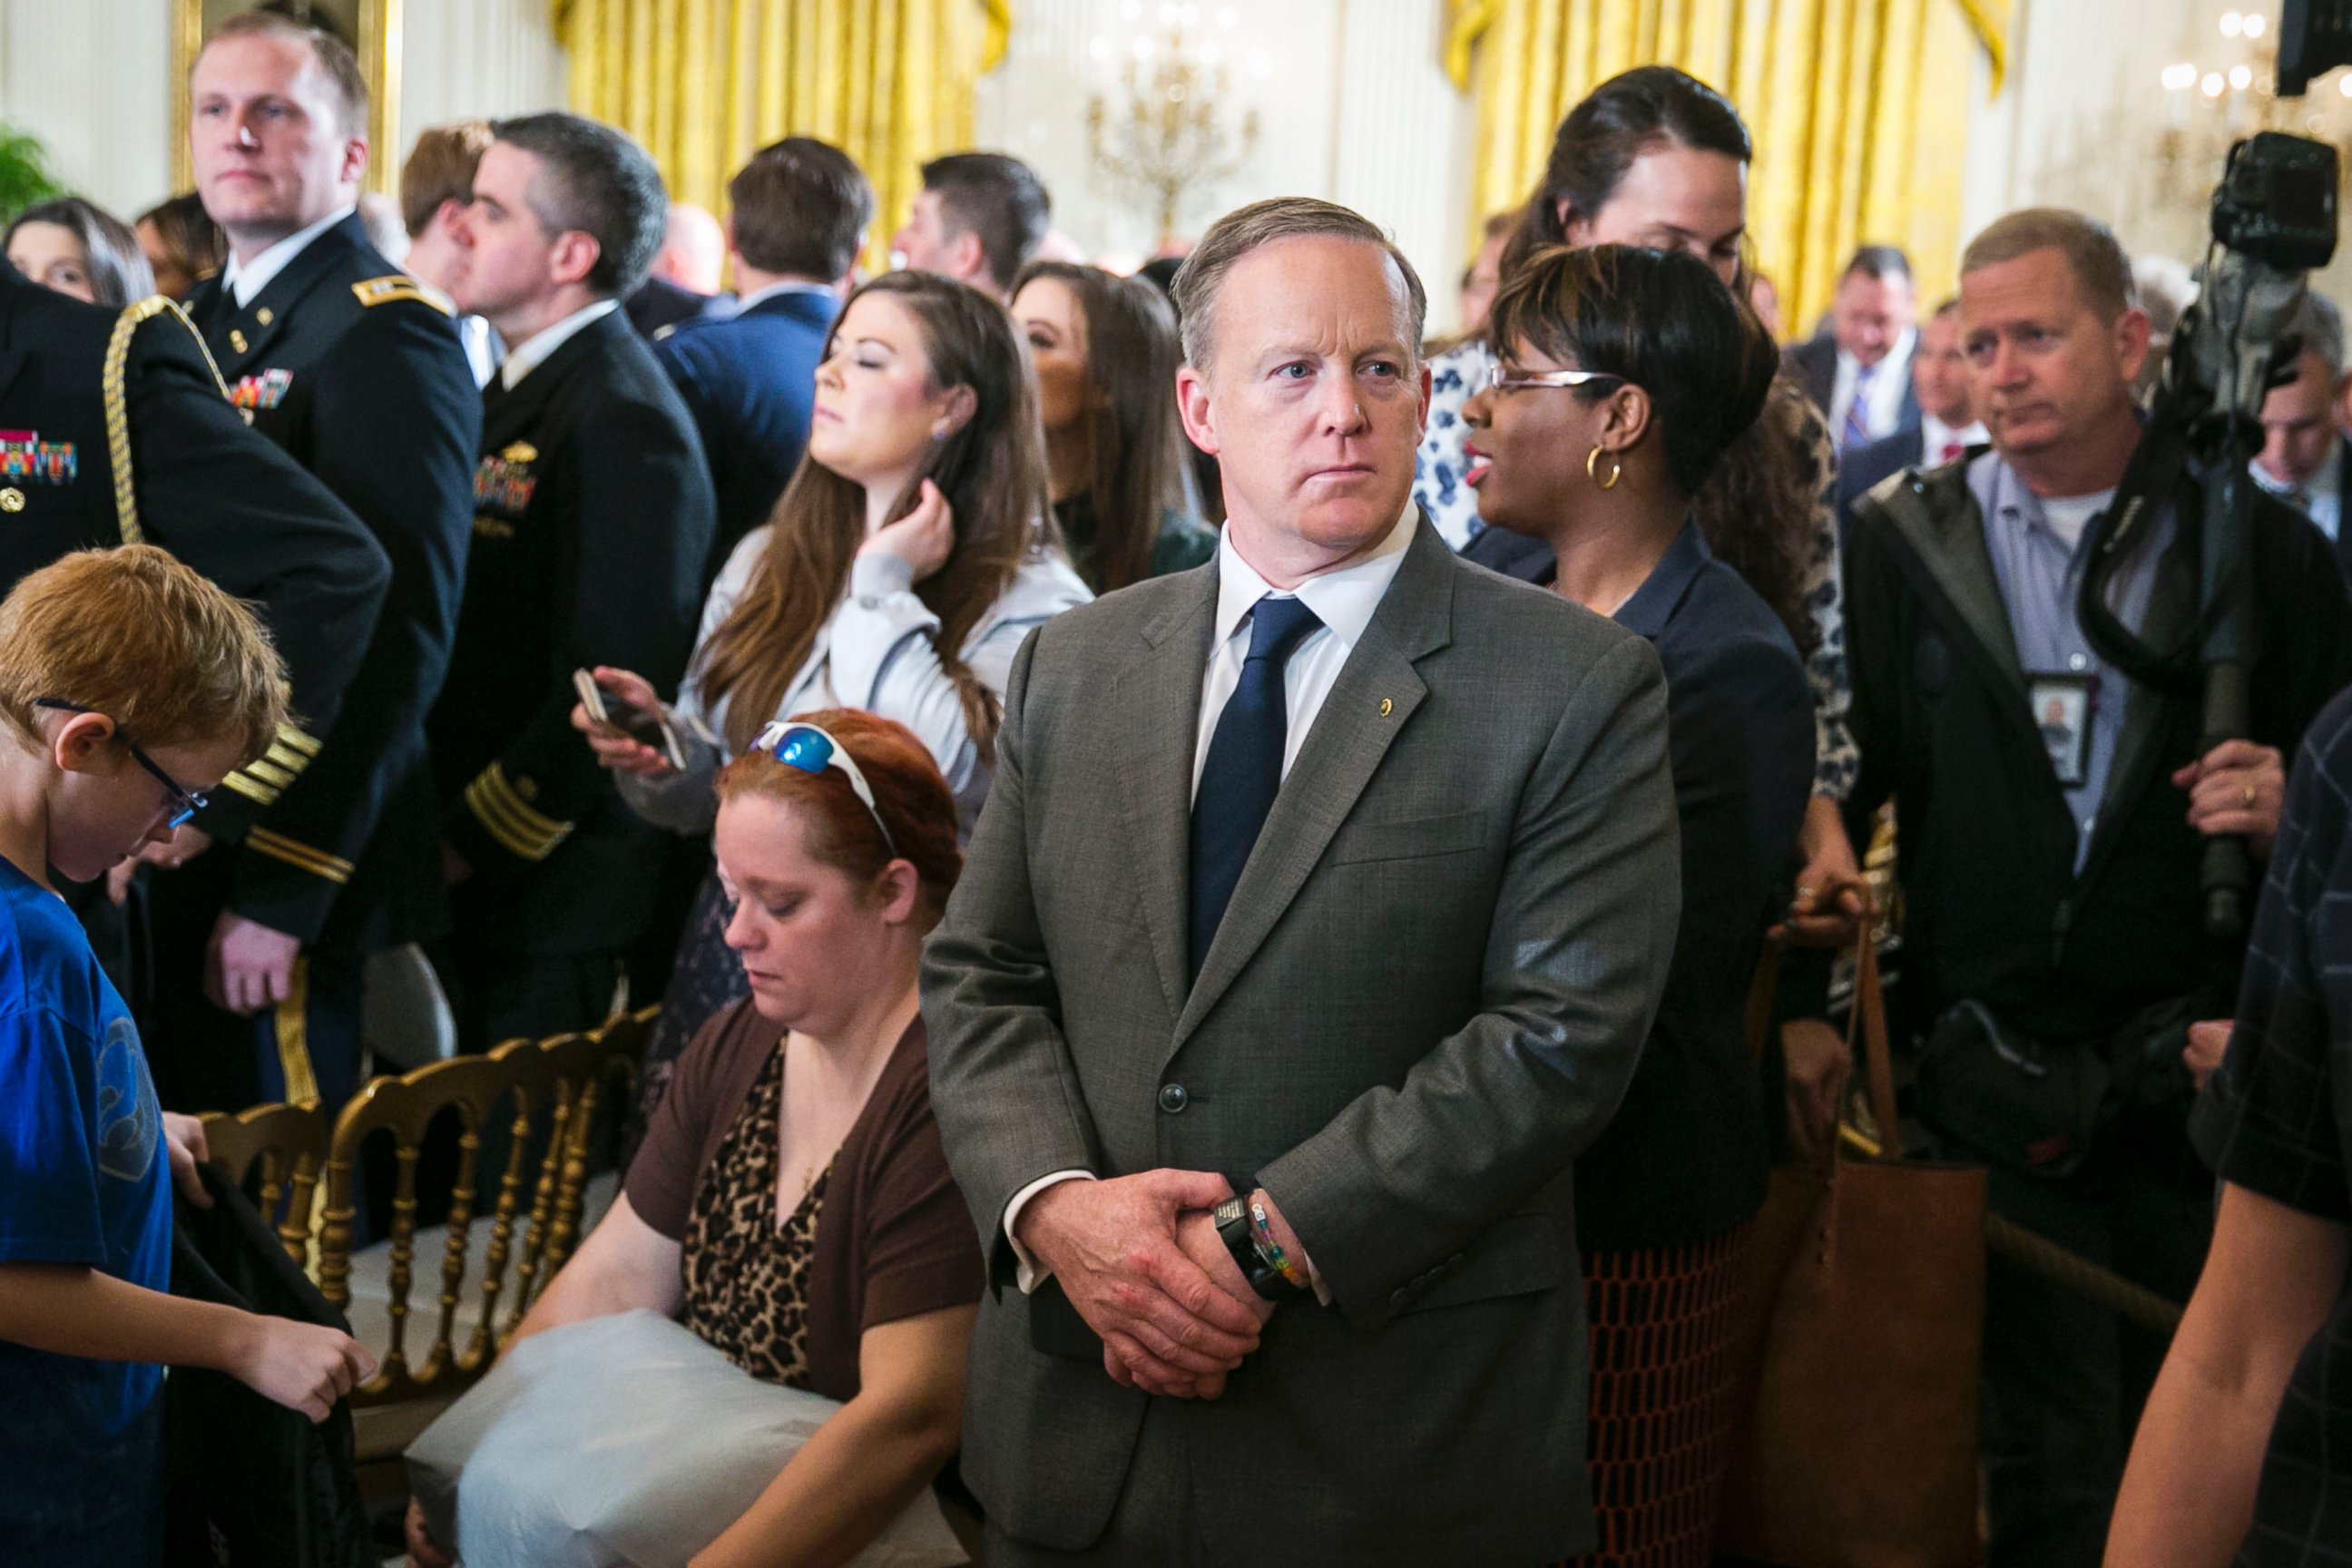 PHOTO: Sean Spicer, White House press secretary, stands at a gathering where President Trump spoke to participants in an annual Wounded Warrior Project Soldier Ride in the East Room at the White House in Washington, April 6, 2017.